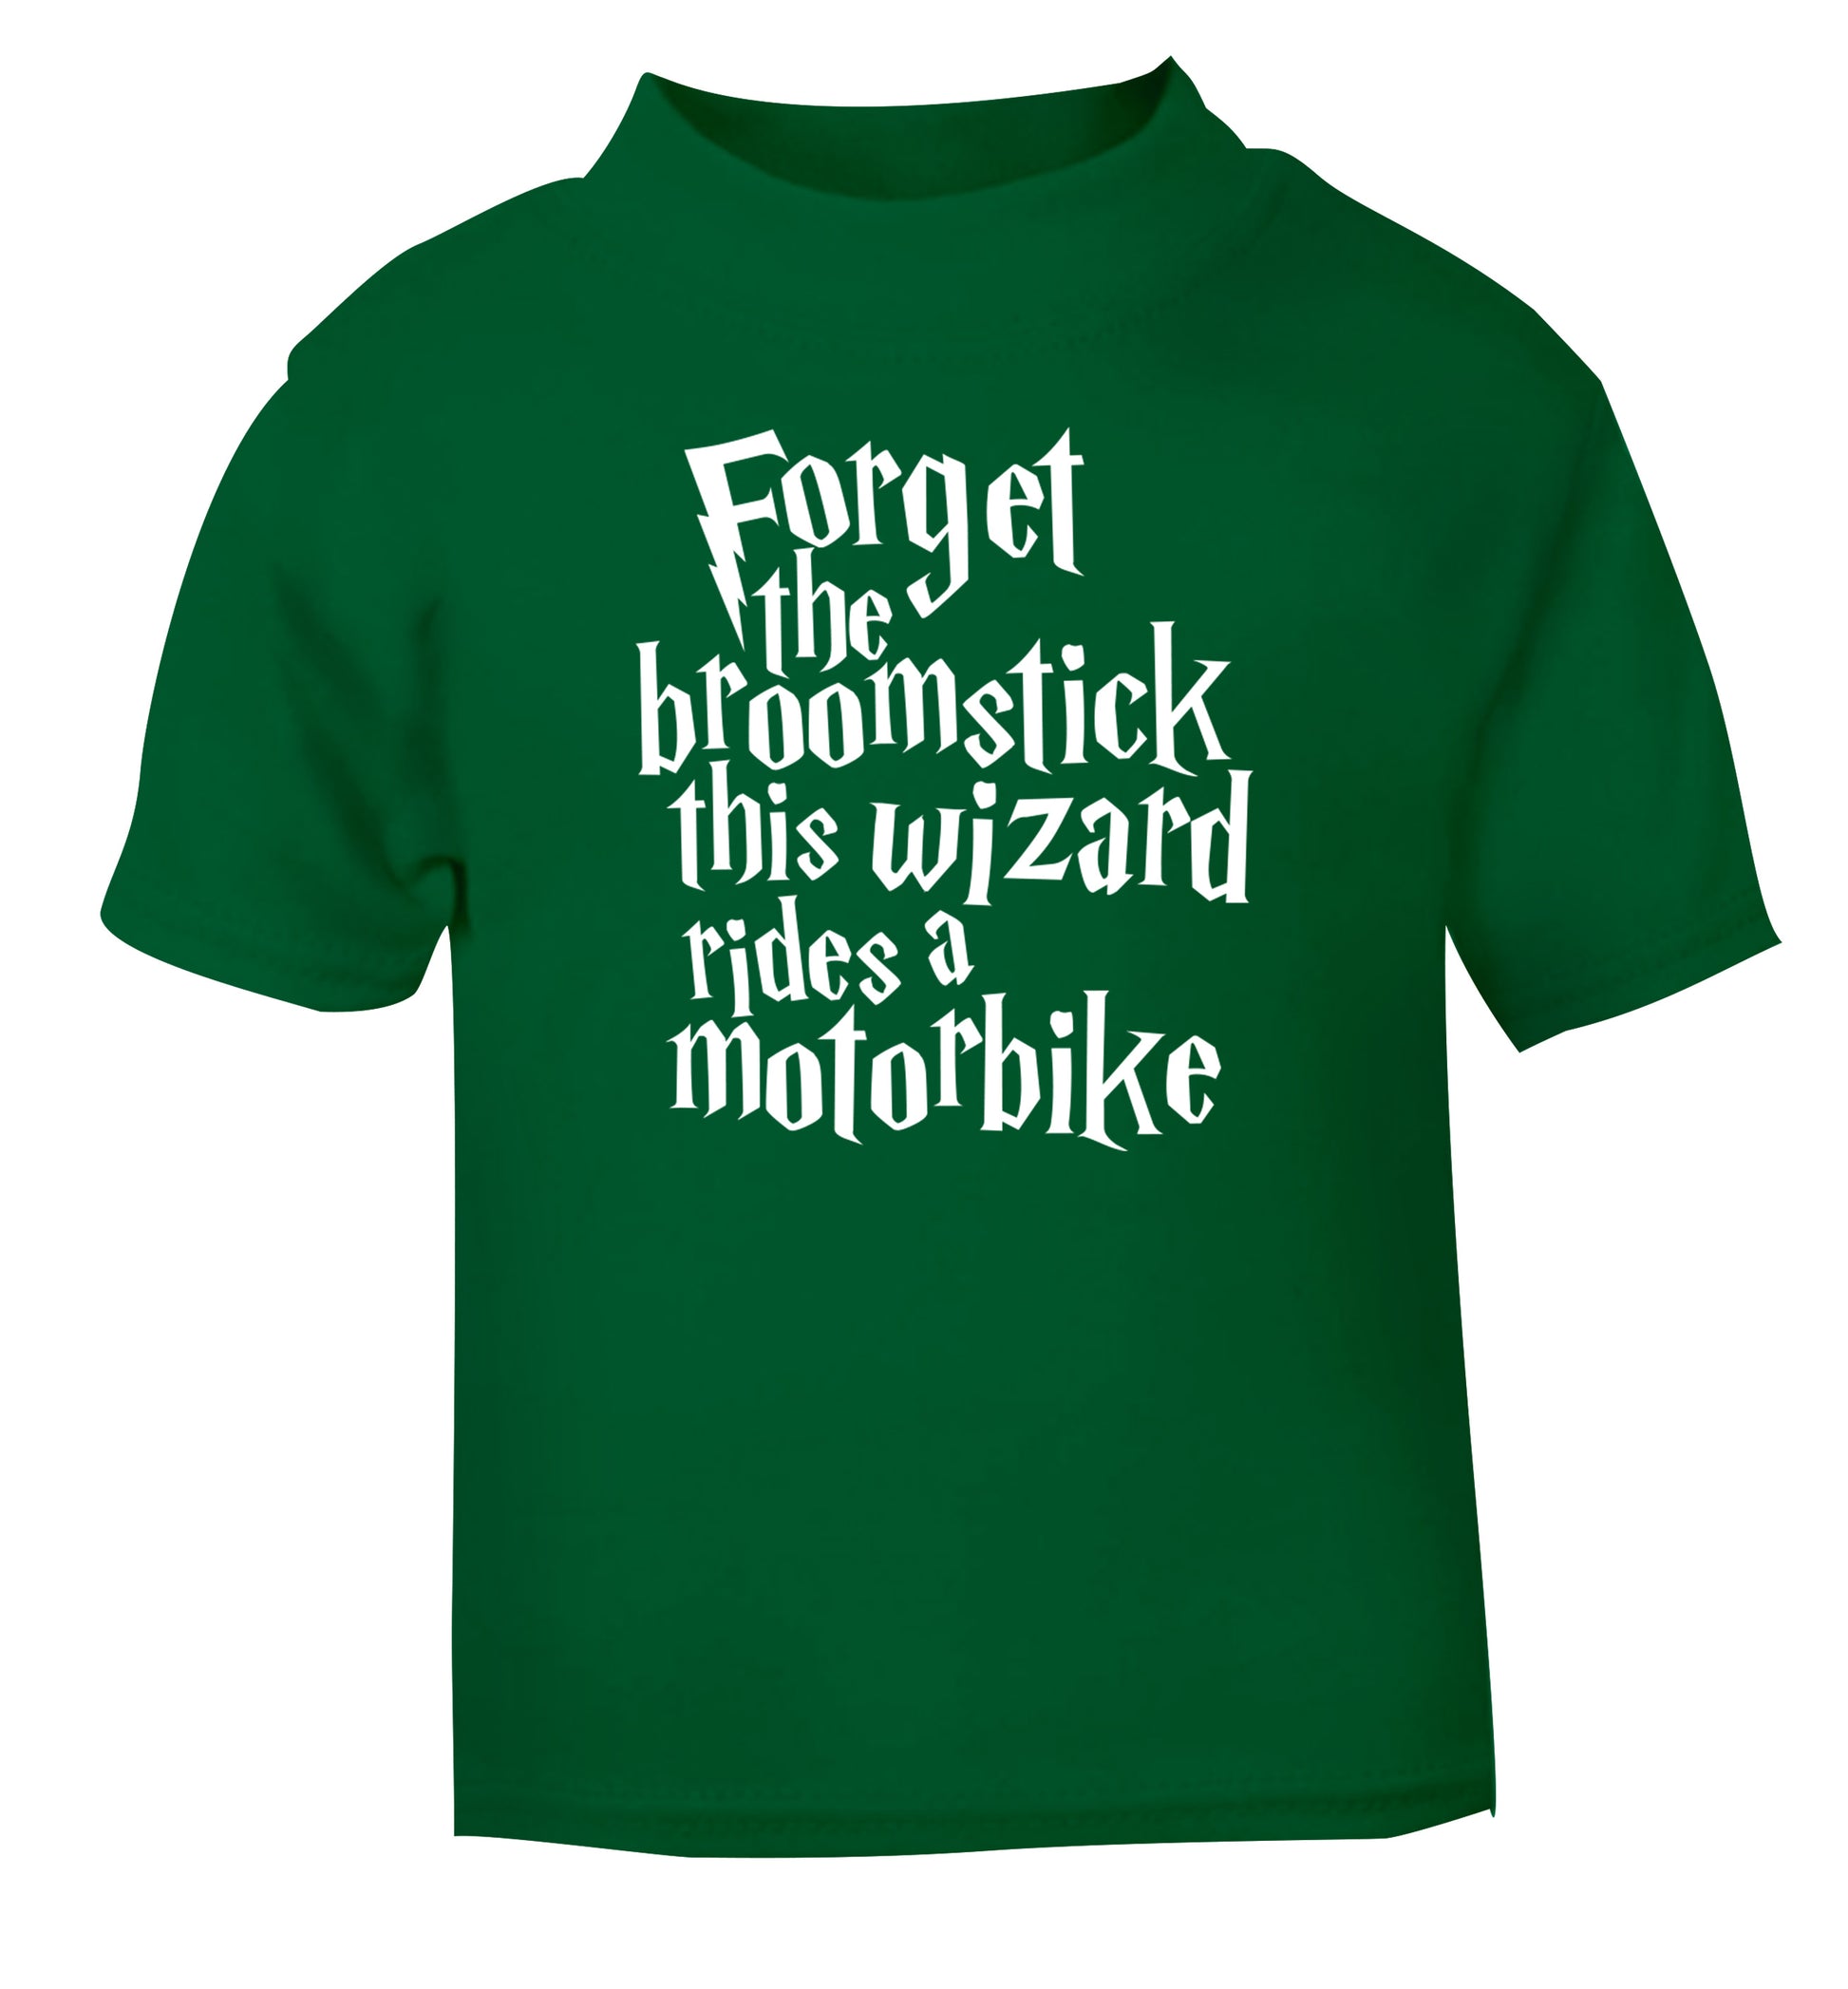 Forget the broomstick this wizard rides a motorbike green Baby Toddler Tshirt 2 Years